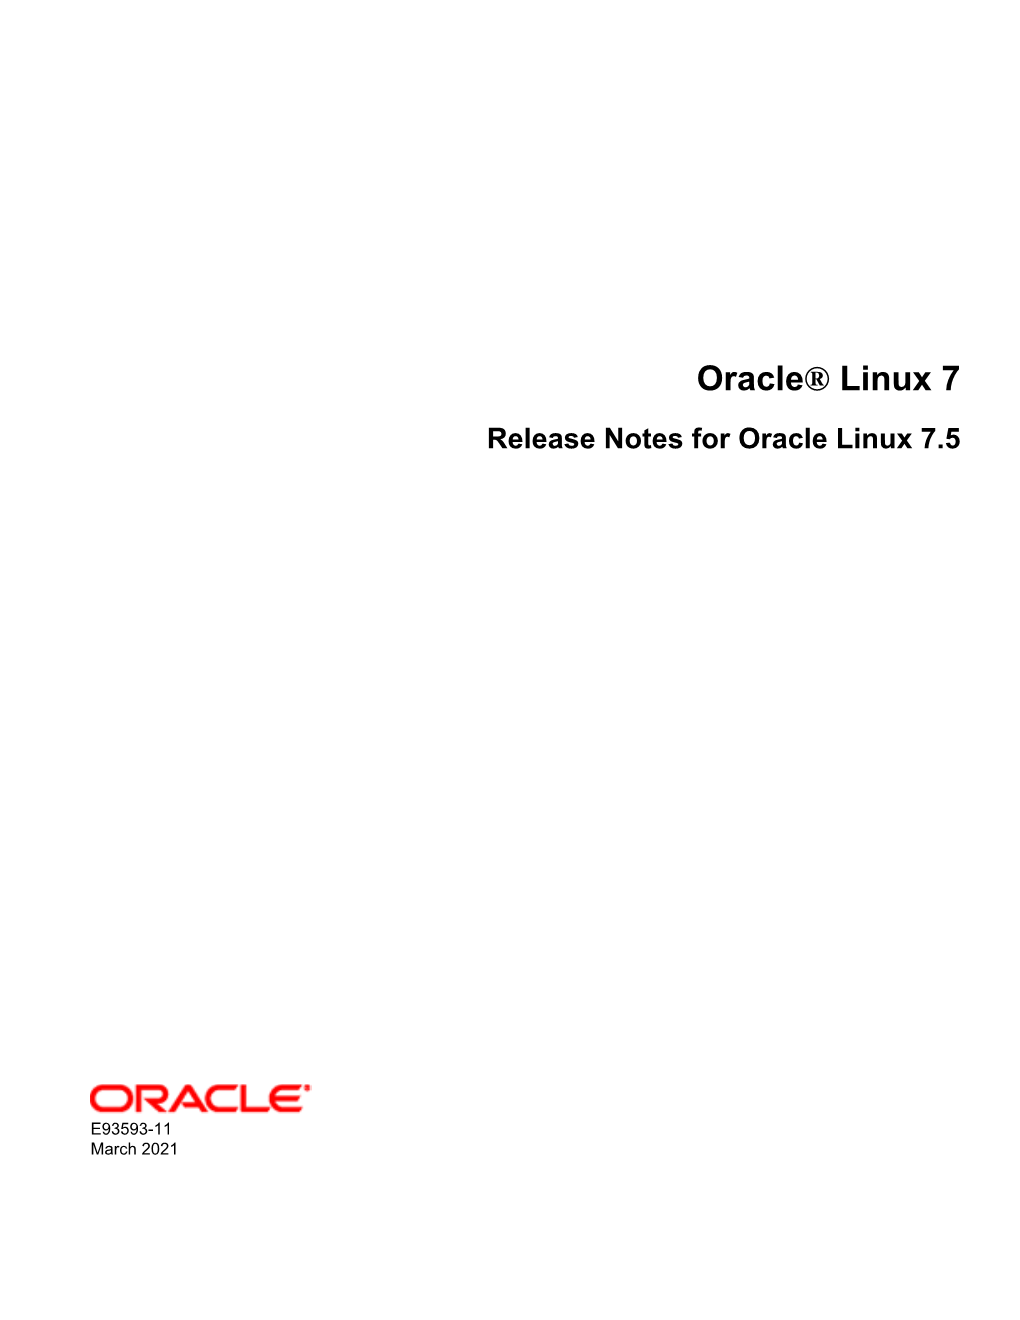 Oracle® Linux 7 Release Notes for Oracle Linux 7.5